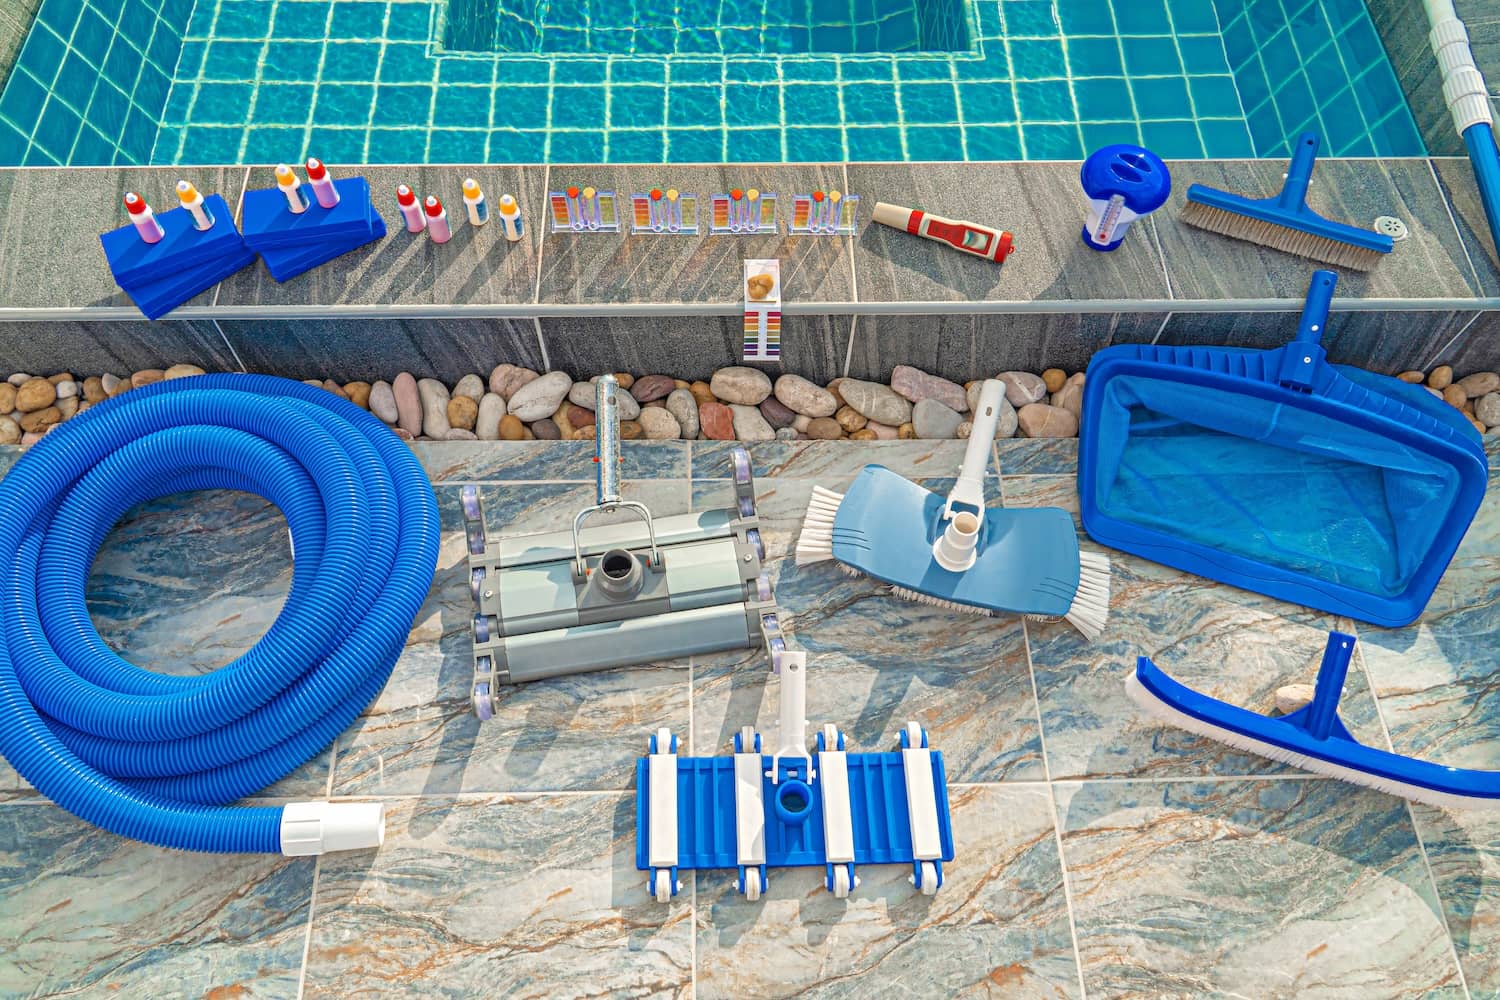 Maintain your pool and pump system after priming